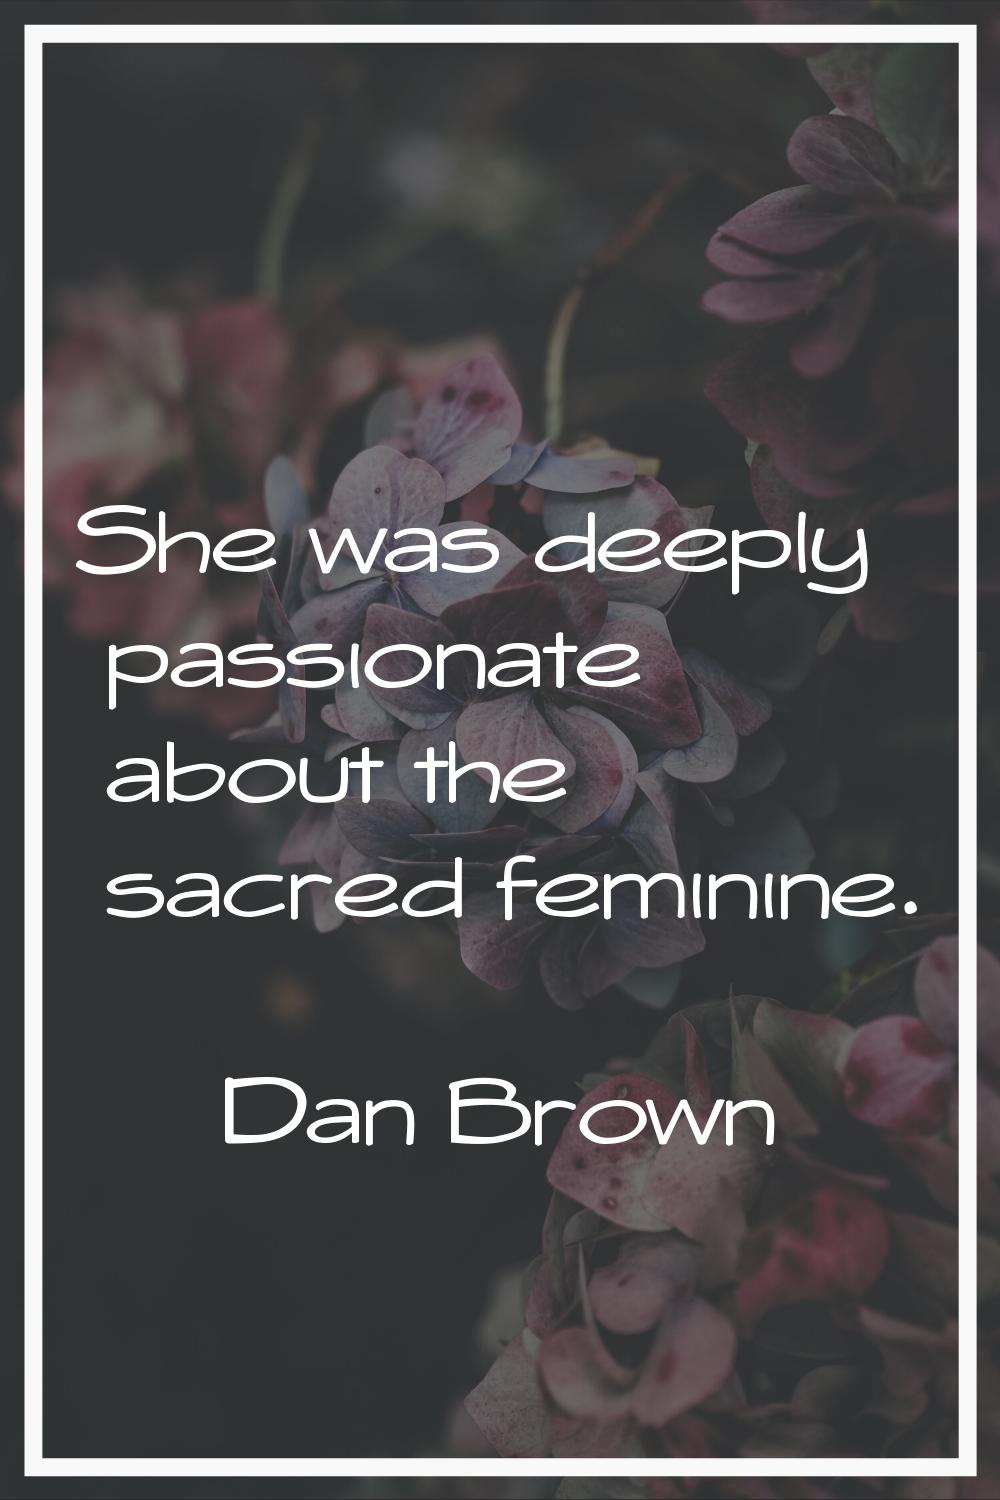 She was deeply passionate about the sacred feminine.